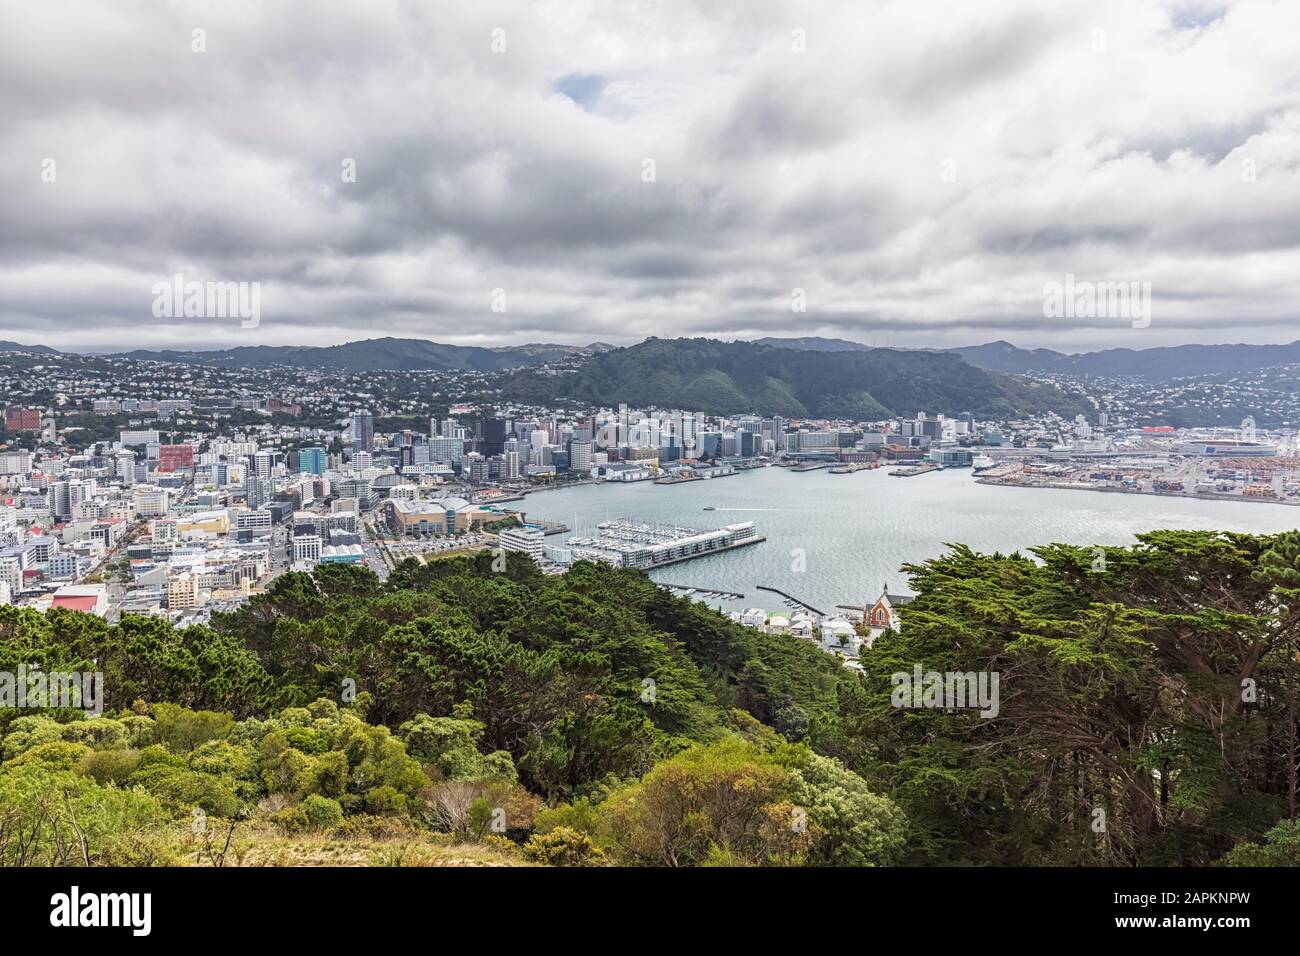 New Zealand, Wellington, Clouds over coastal city seen from summit of Mount Victoria Stock Photo